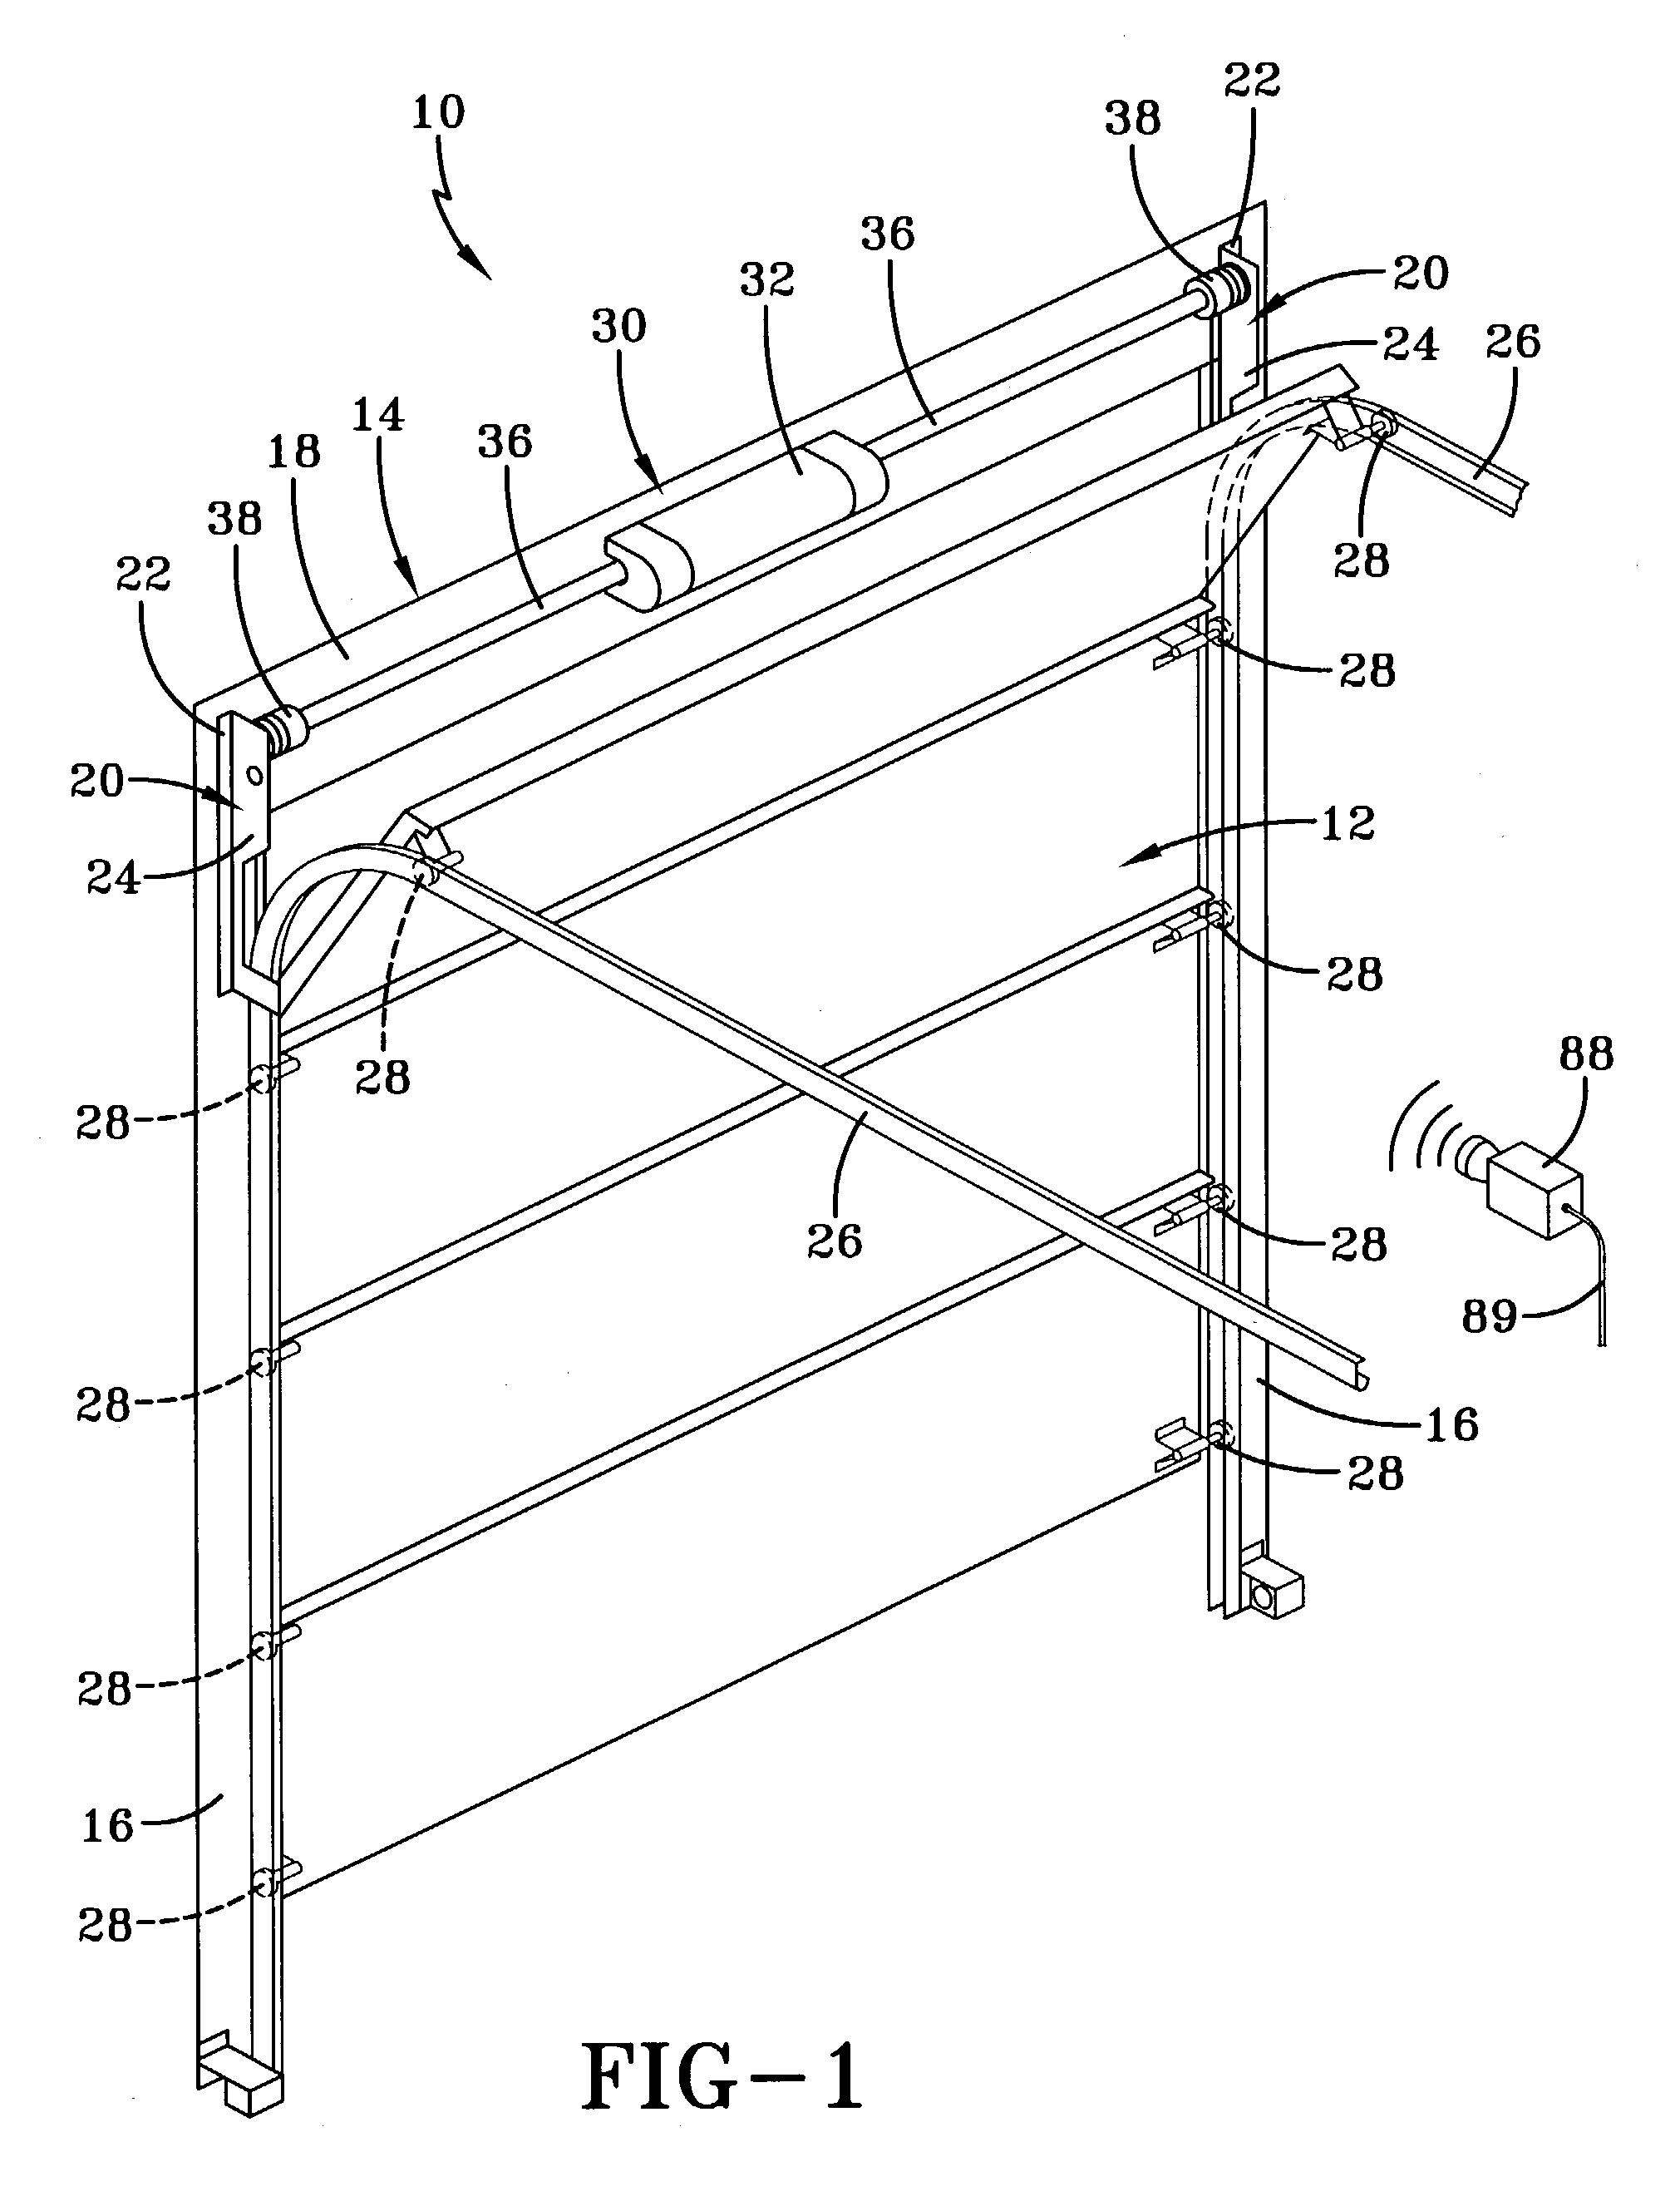 System and related methods for signaling the position of a movable barrier and securing its position